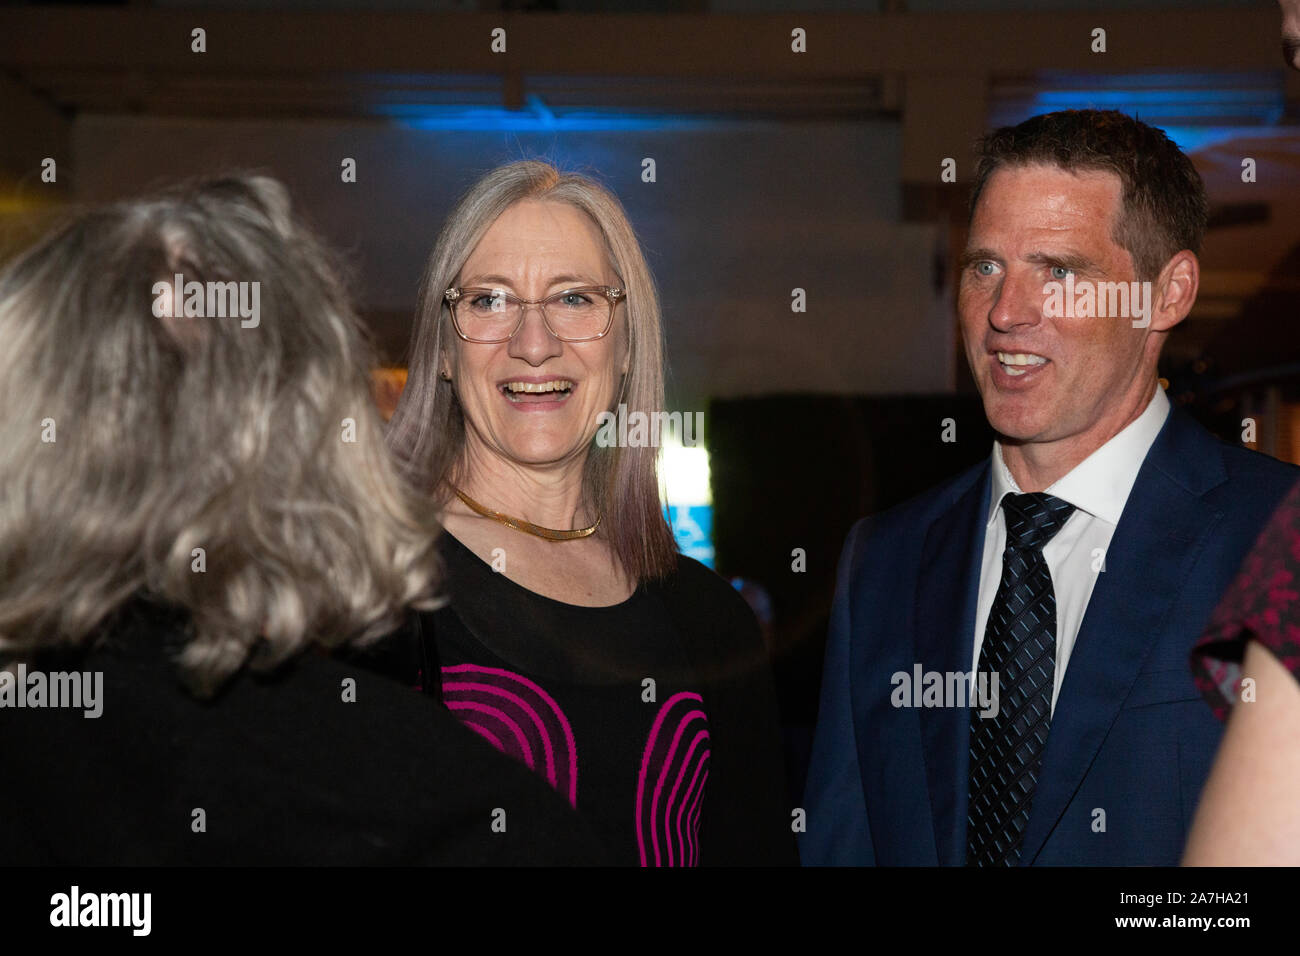 October 19, 2019 - Los Angeles, CA - Lisa Henson, CEO and President of the Jim Henson Company with actor Ben Browder (John Crichton) at the  Farscape Stock Photo